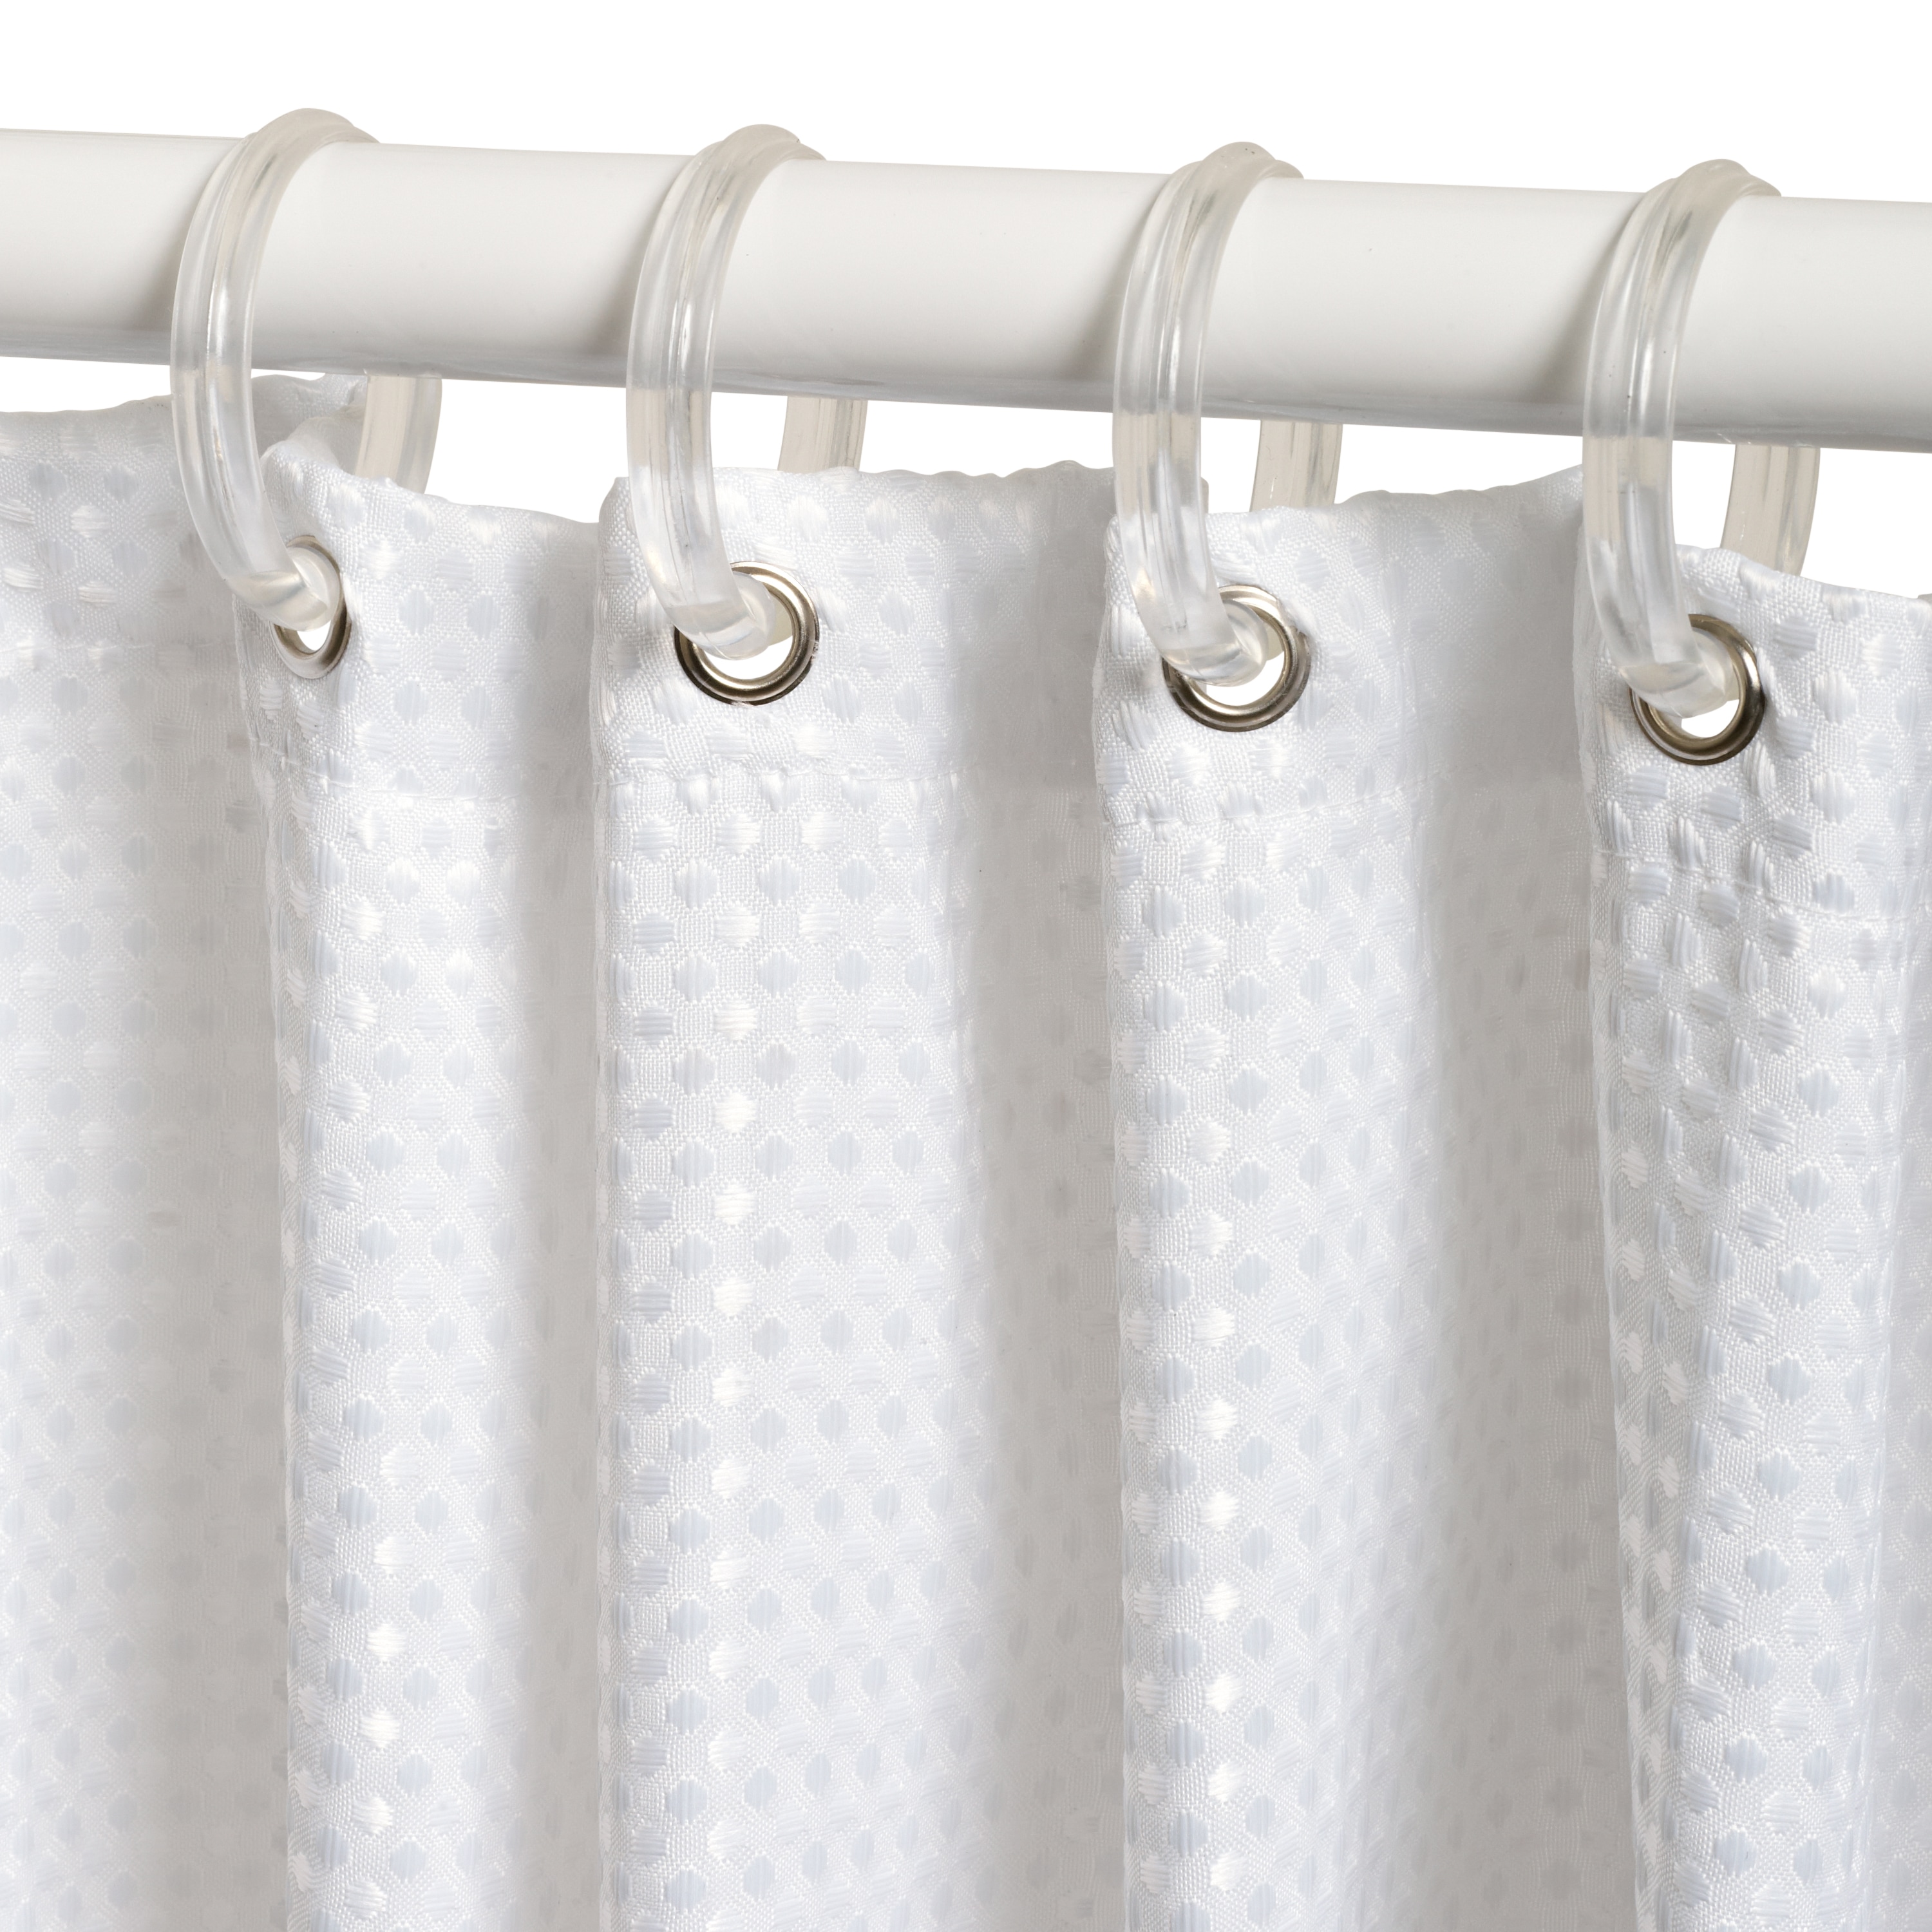 Clear or White Shower Curtain Rings